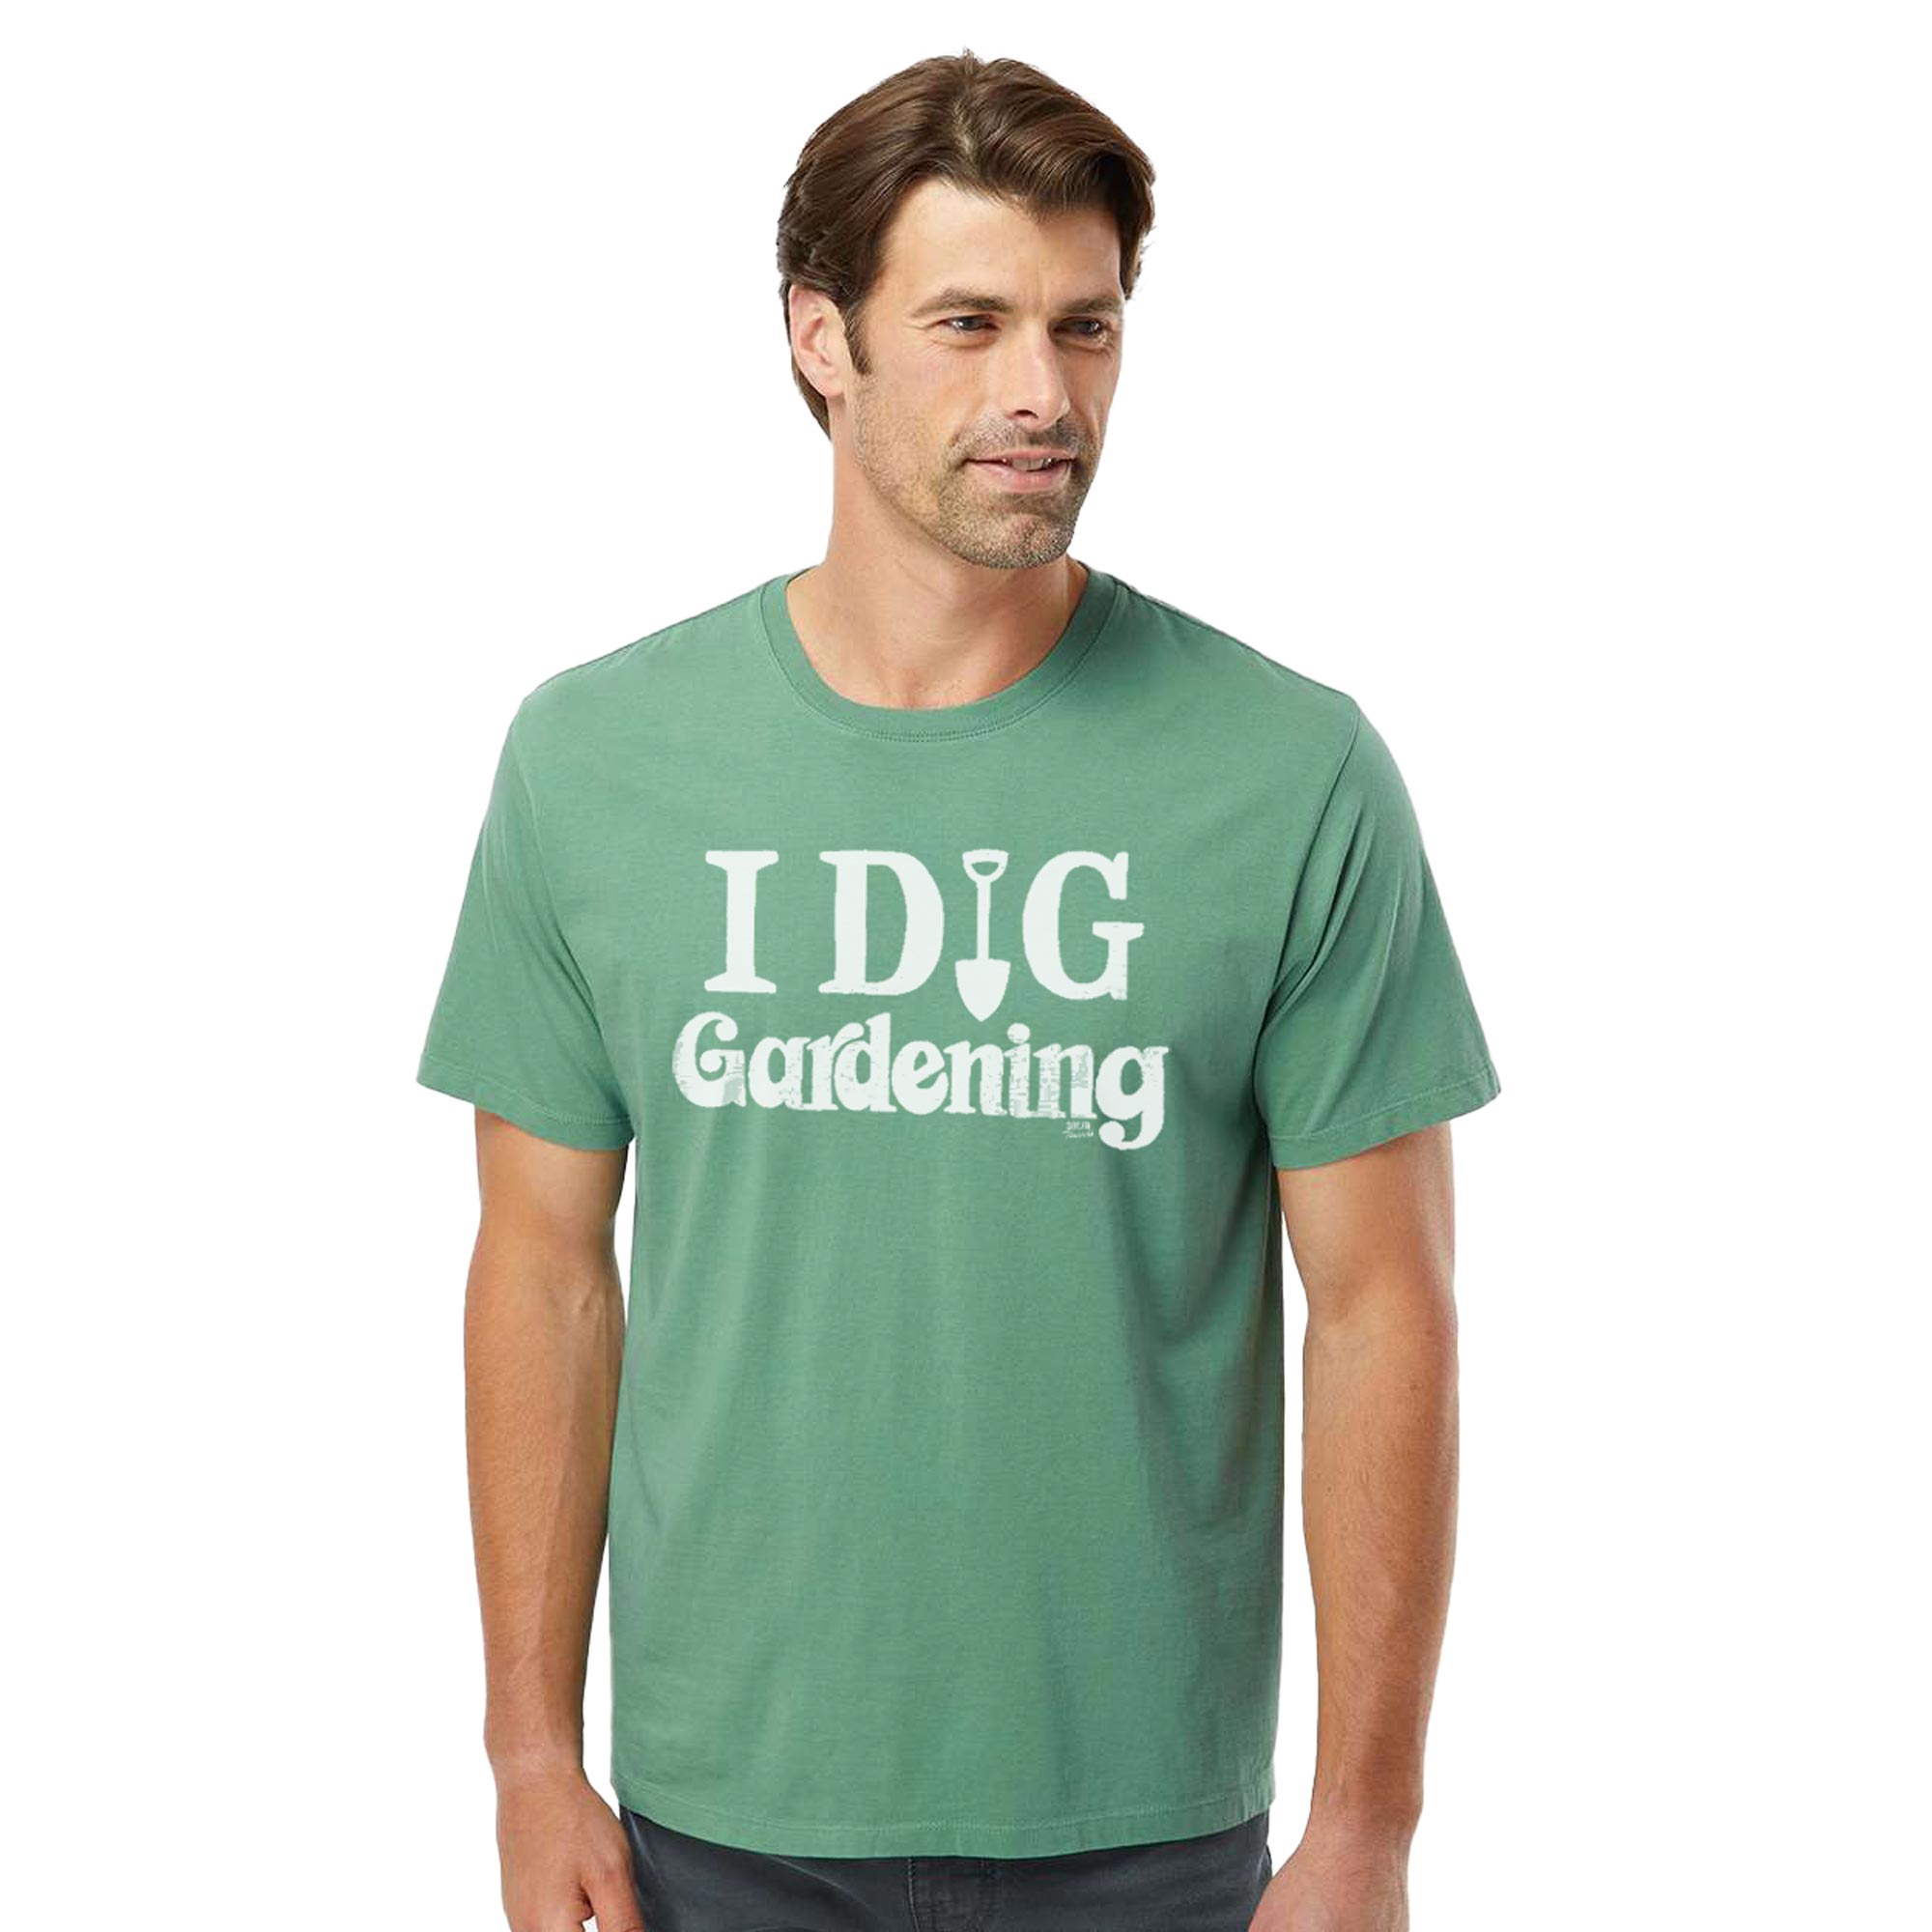 I Dig Gardening Vintage Organic Cotton T-shirt | Funny Nature   Tee | Solid Threads